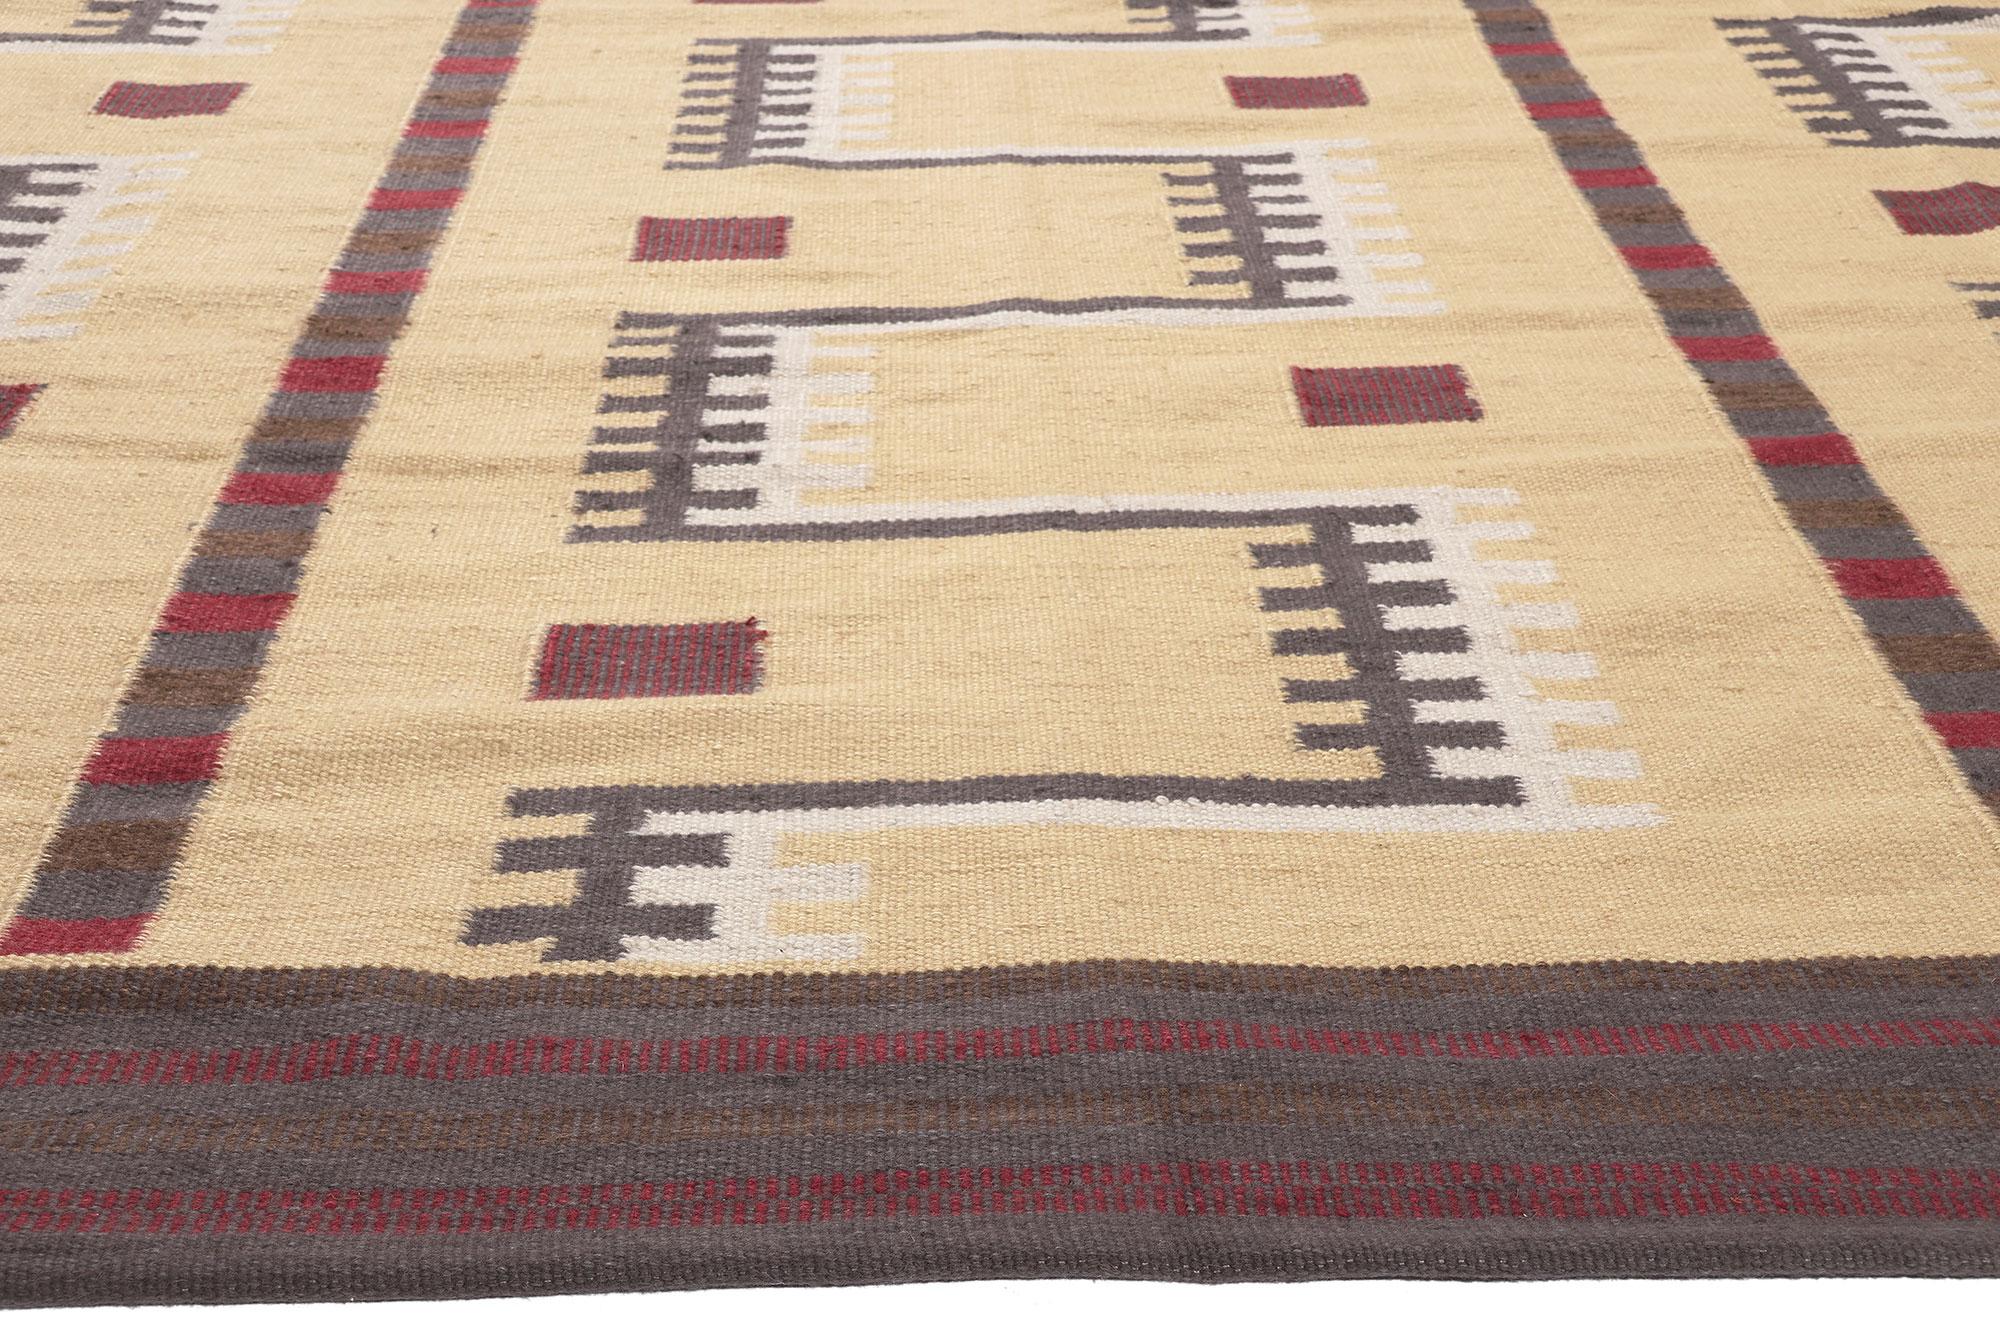 New Swedish Inspired Scandinavian Modern Style Kilim Rug, 10'02 x 12'10 In New Condition For Sale In Dallas, TX